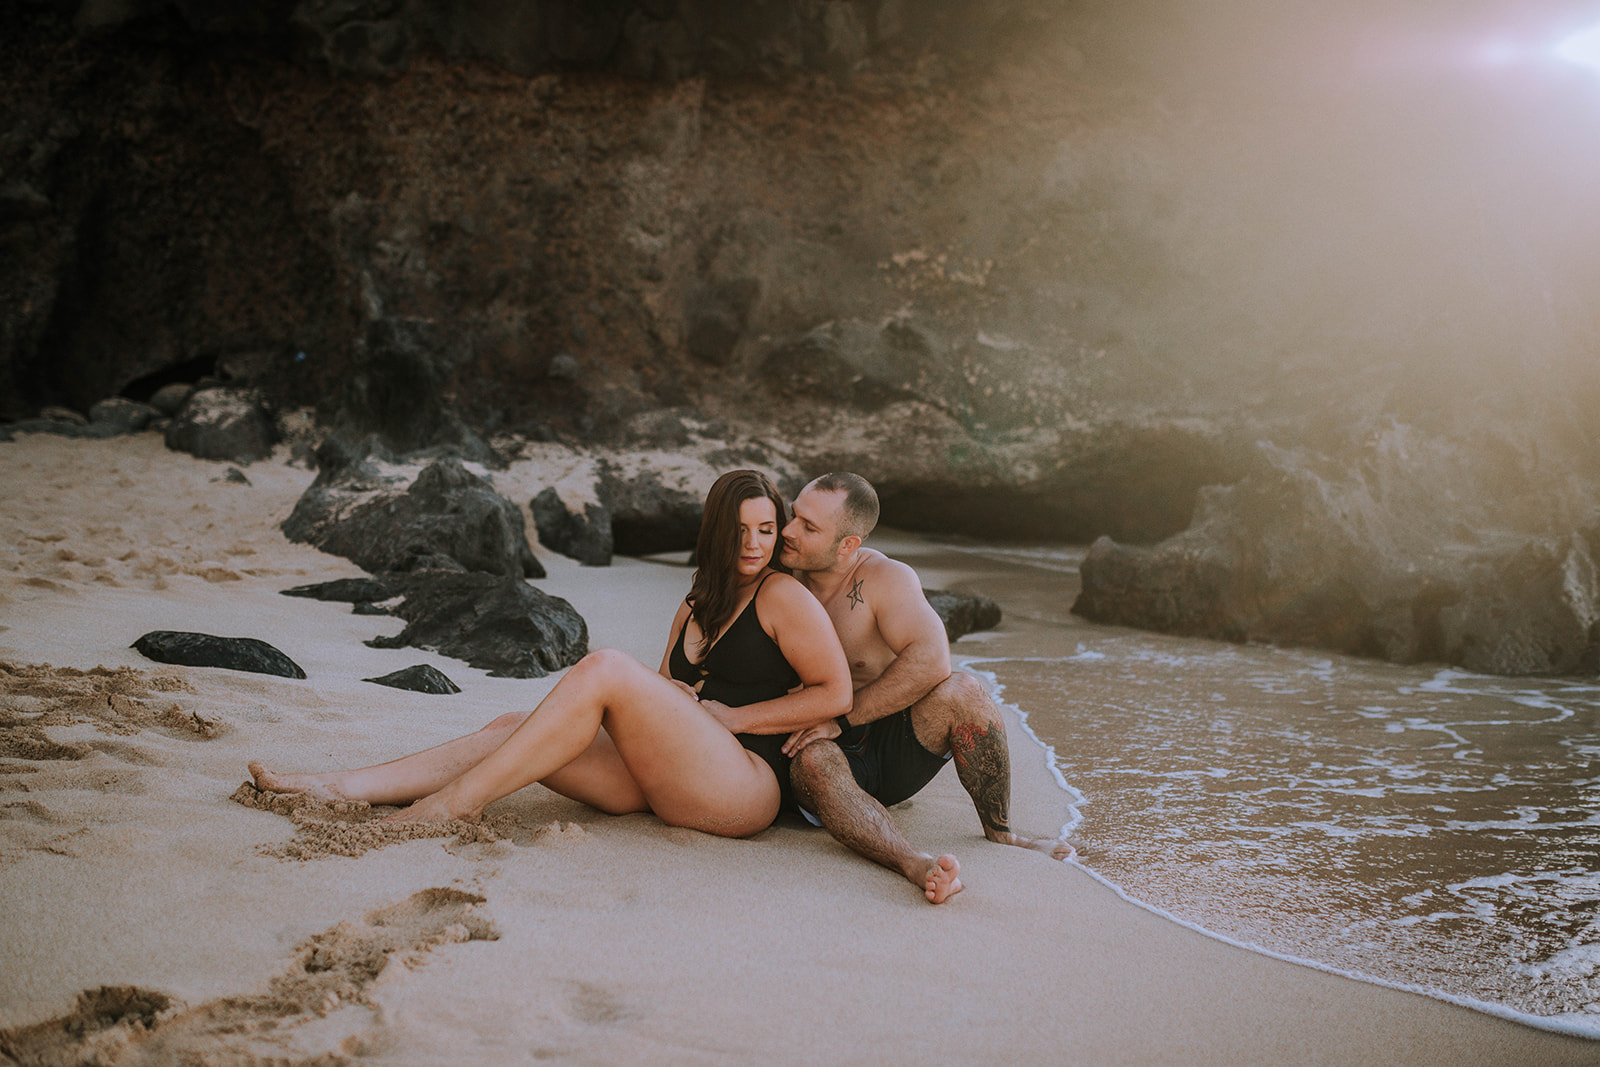 Oahu Adventurous Couple Session | Waimea Bay by Anela Benavides Photography. Includes posing inspiration for an outdoor couples session. Book your Chicago couples session and browse the blog for more inspiration #couples #photography #couplesphotography #Oahuphotographer #HawaiiPhotographer